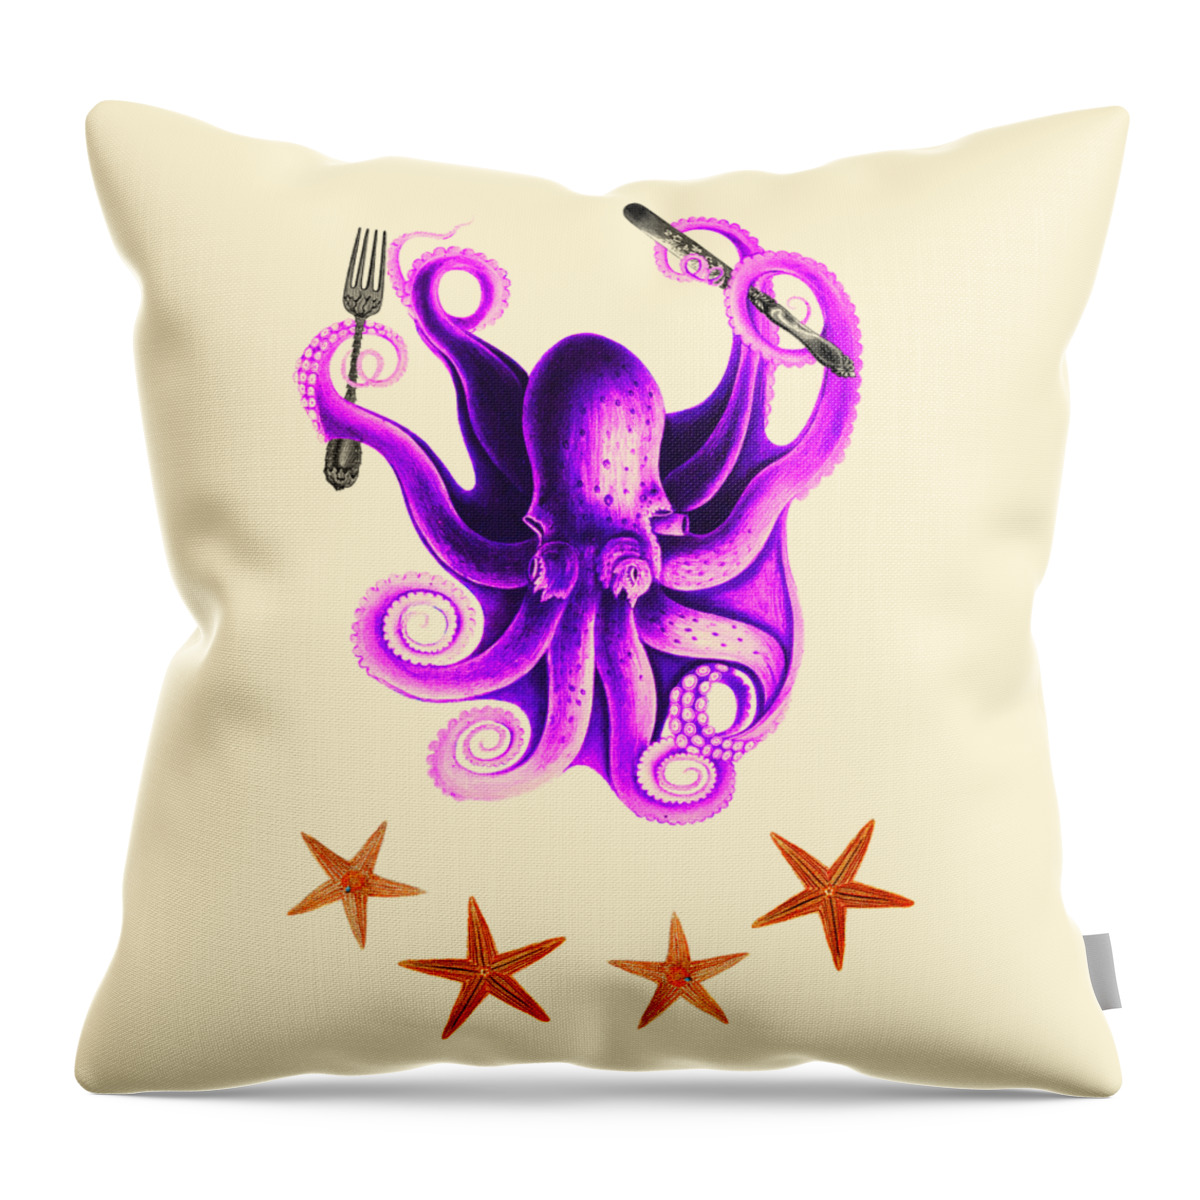 Octopus Throw Pillow featuring the digital art Funny Octopus Cook by Madame Memento